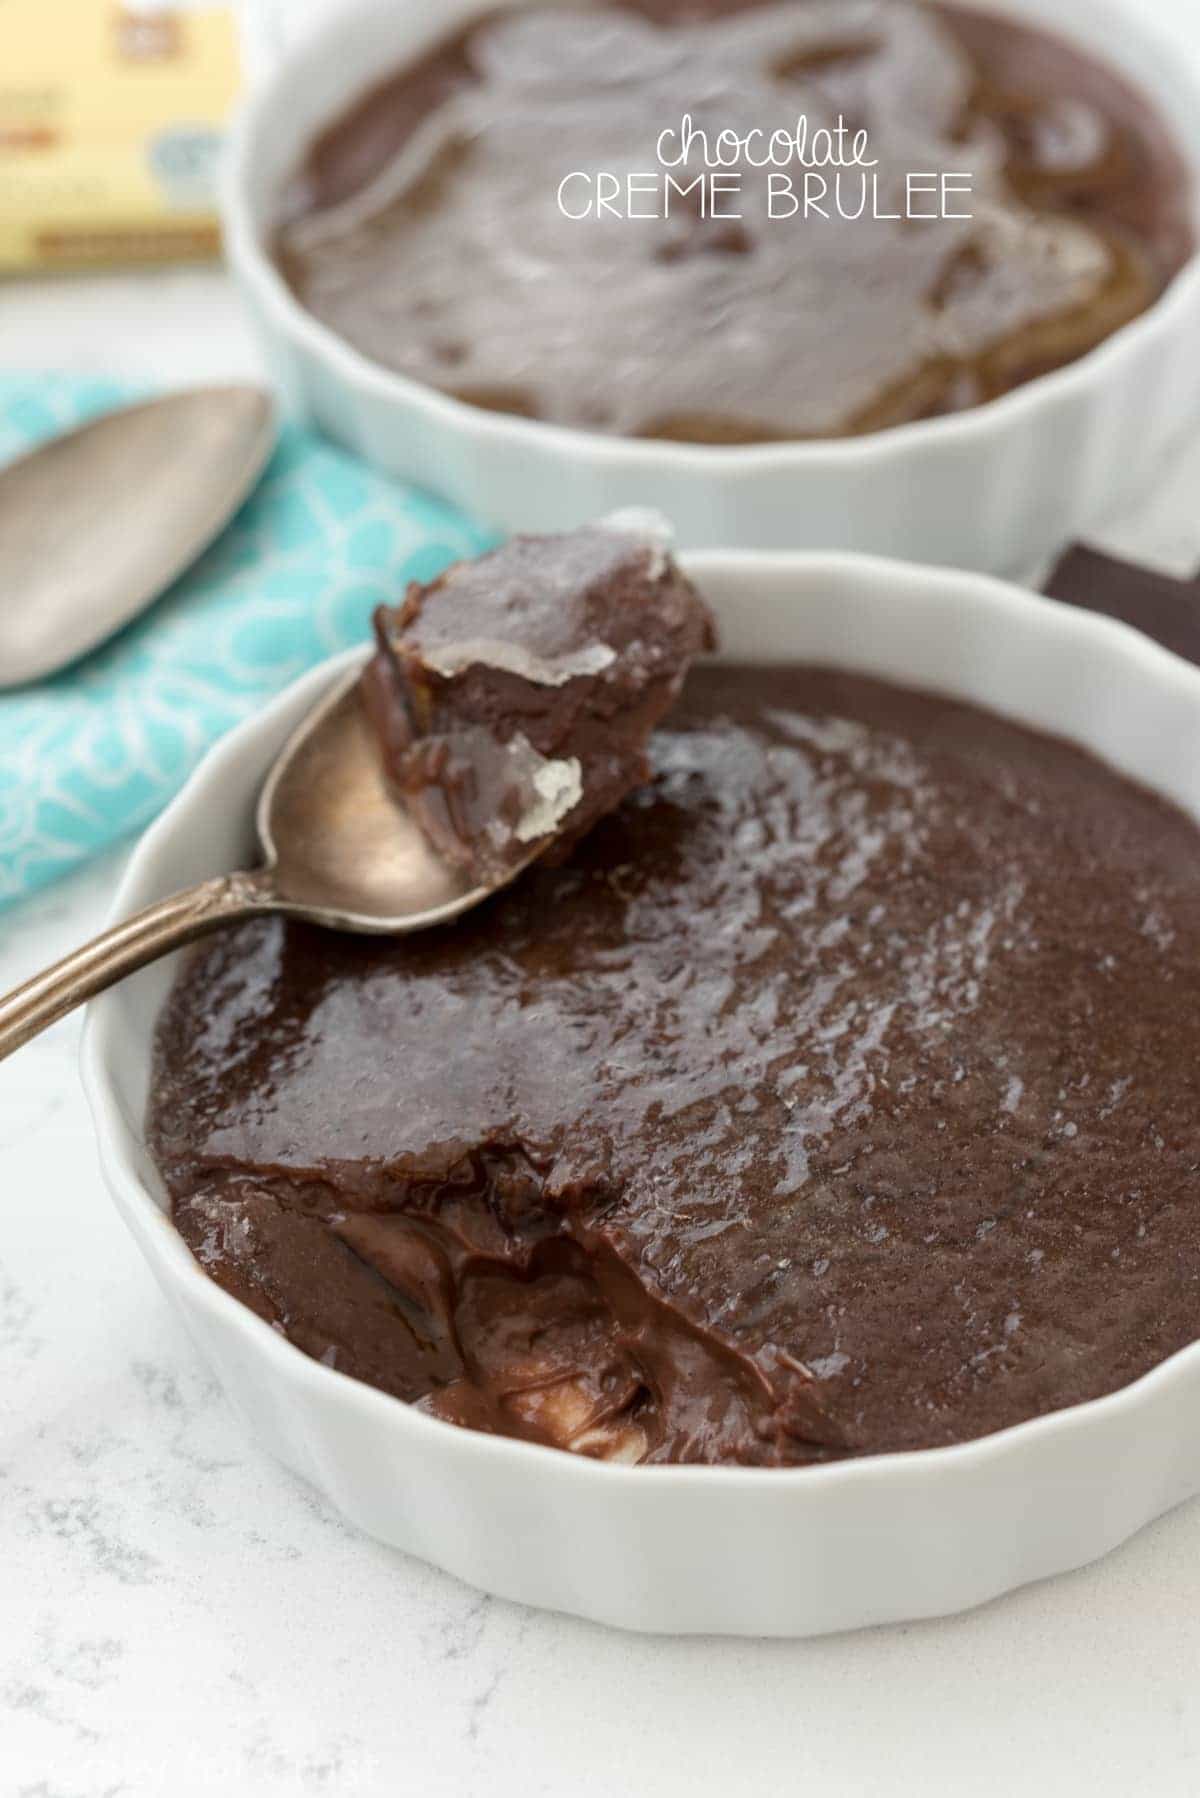 Easy Chocolate Creme Brulee for two! This easy recipe is no bake and there are no eggs - just tons of chocolate and creme brulee flavor!